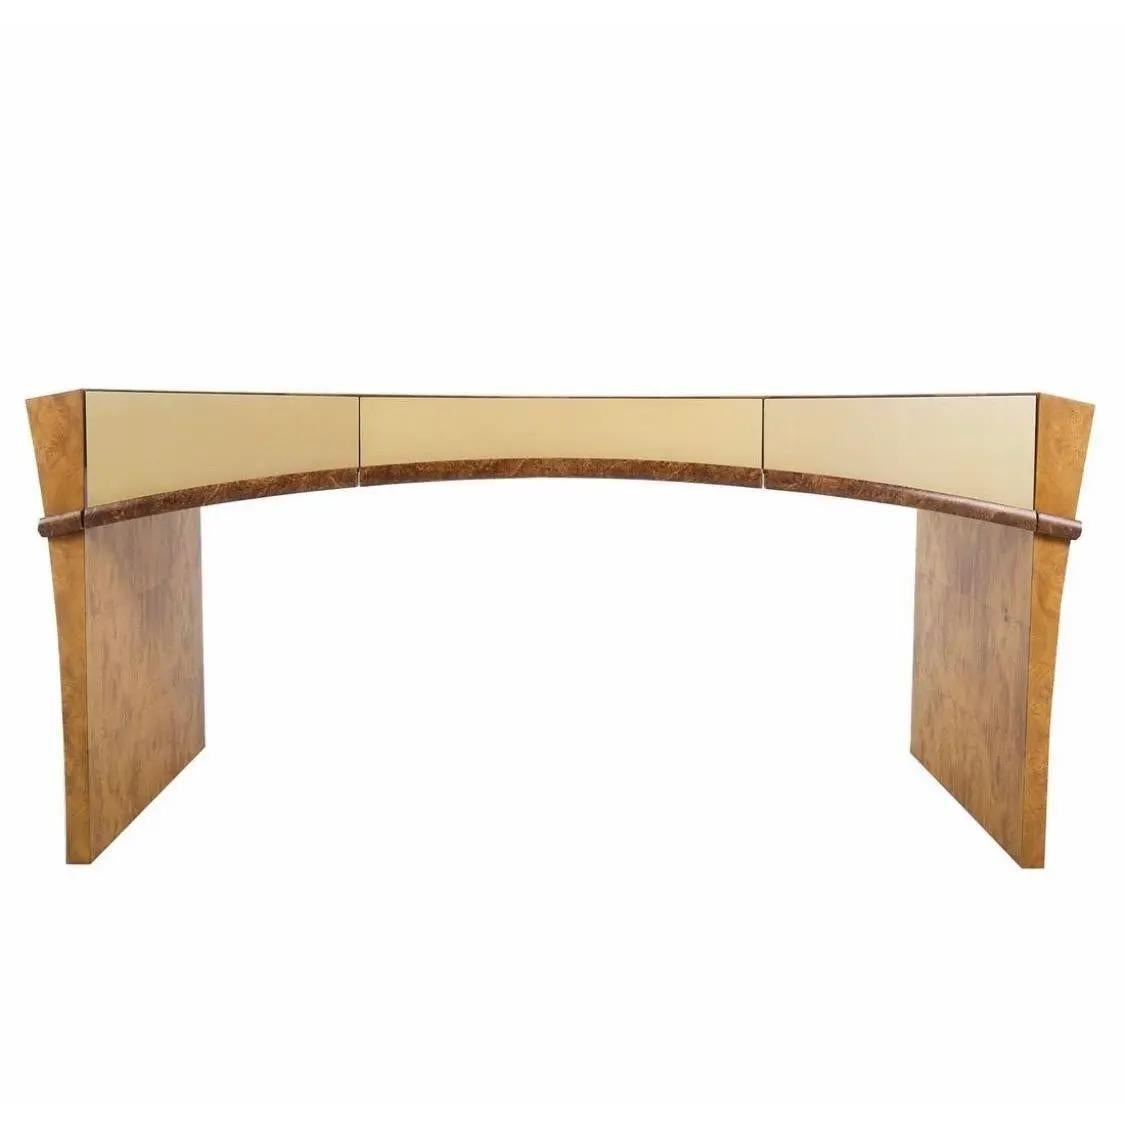 This executive desk from the 1970s is a stunning piece of furniture, boasting a gorgeous burl veneer with a lacquered finish. The beautiful and spacial top of the desk features three drawers, including a central long drawer and two shorter ones on